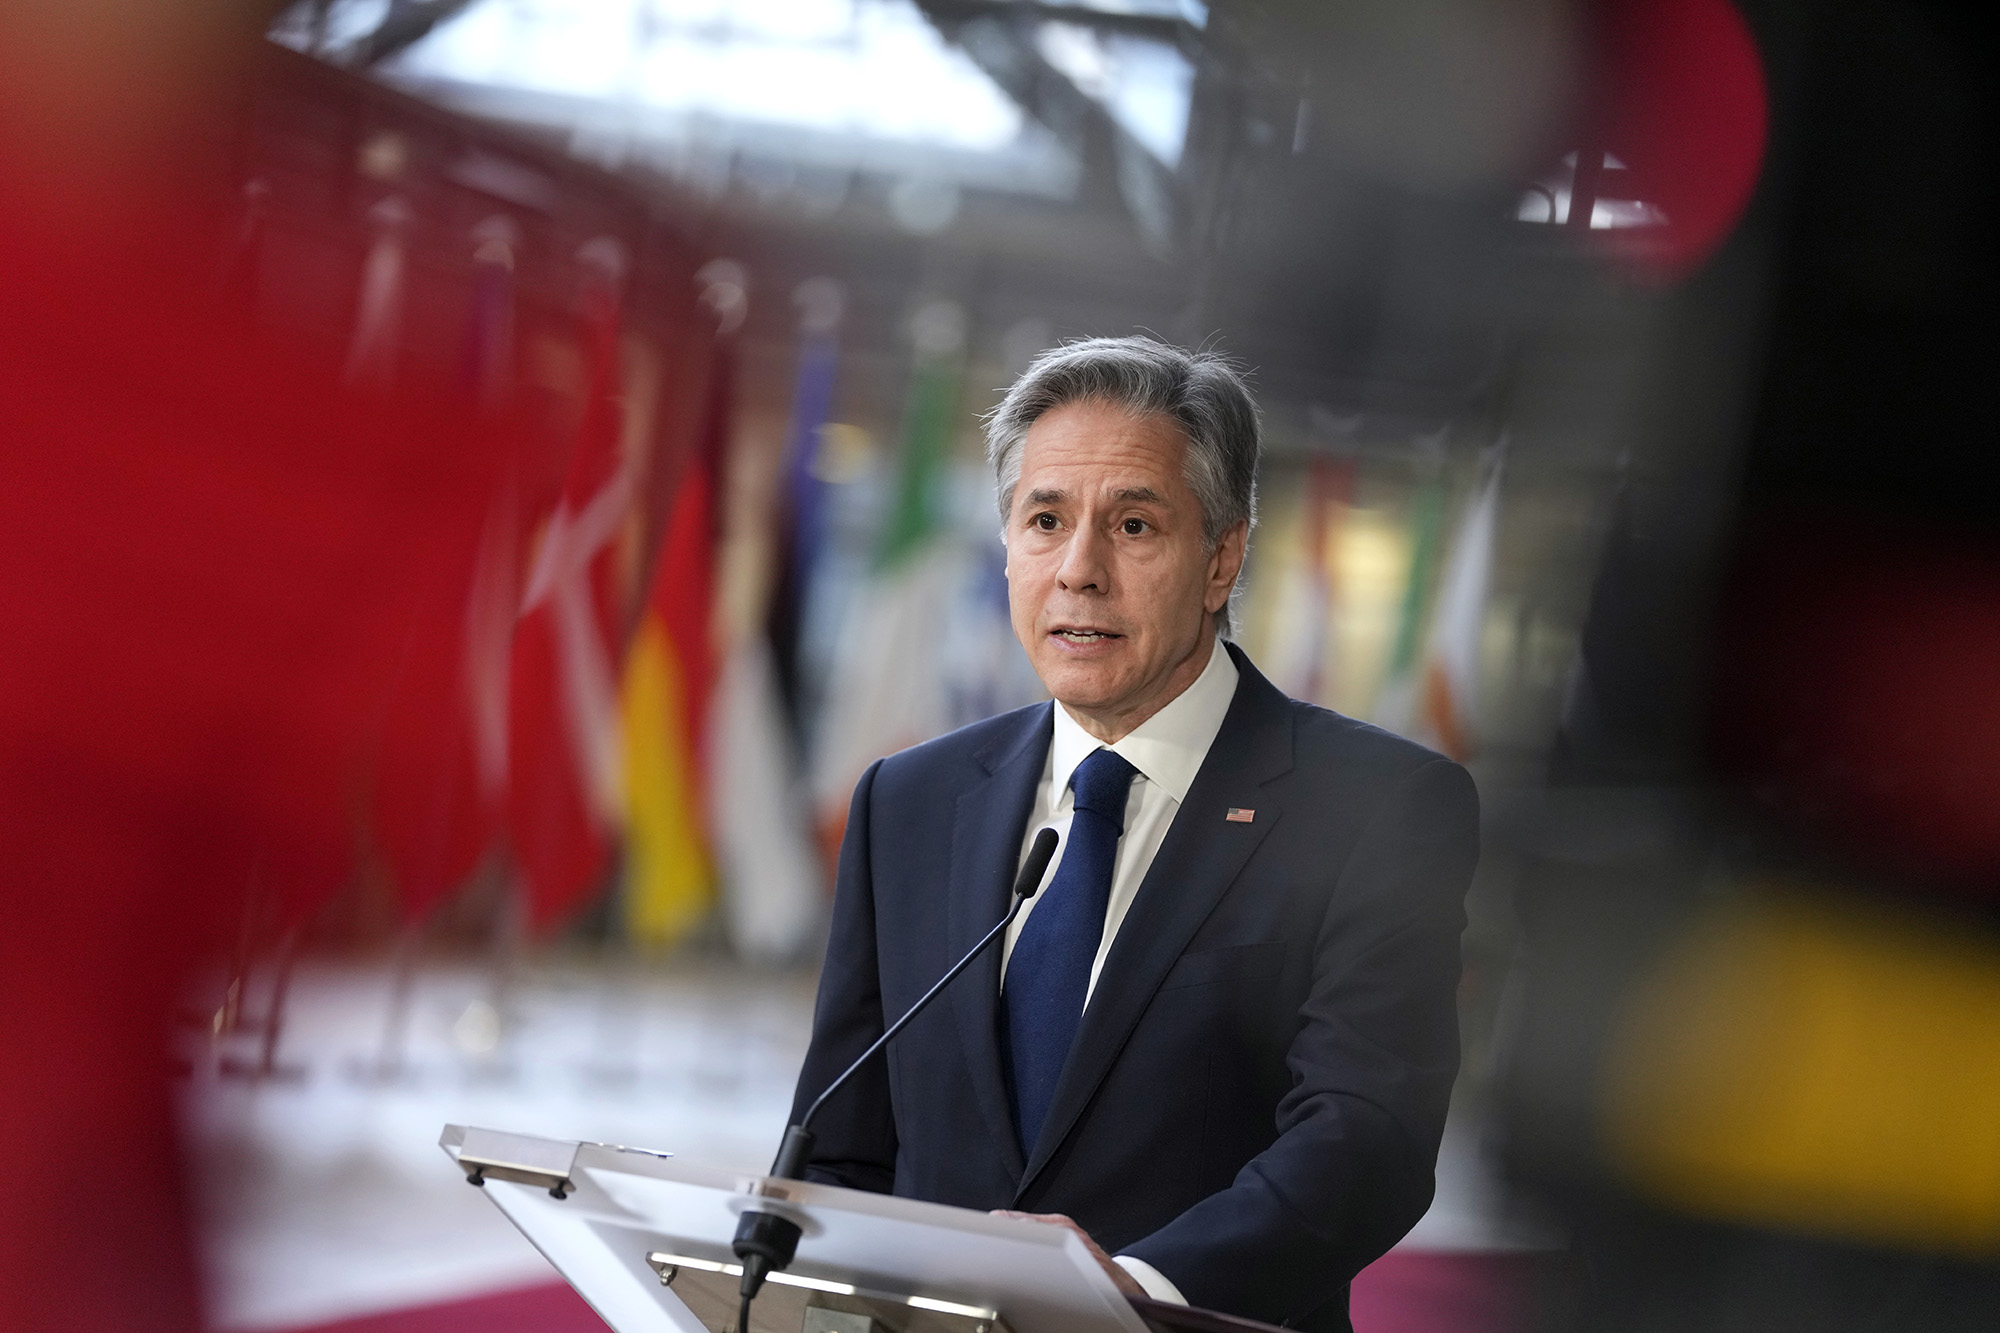 United States Secretary of State Antony Blinken addresses the media prior to the EU-US Energy Council Ministerial meeting at the European Council building in Brussels, Belgium, on April 4.